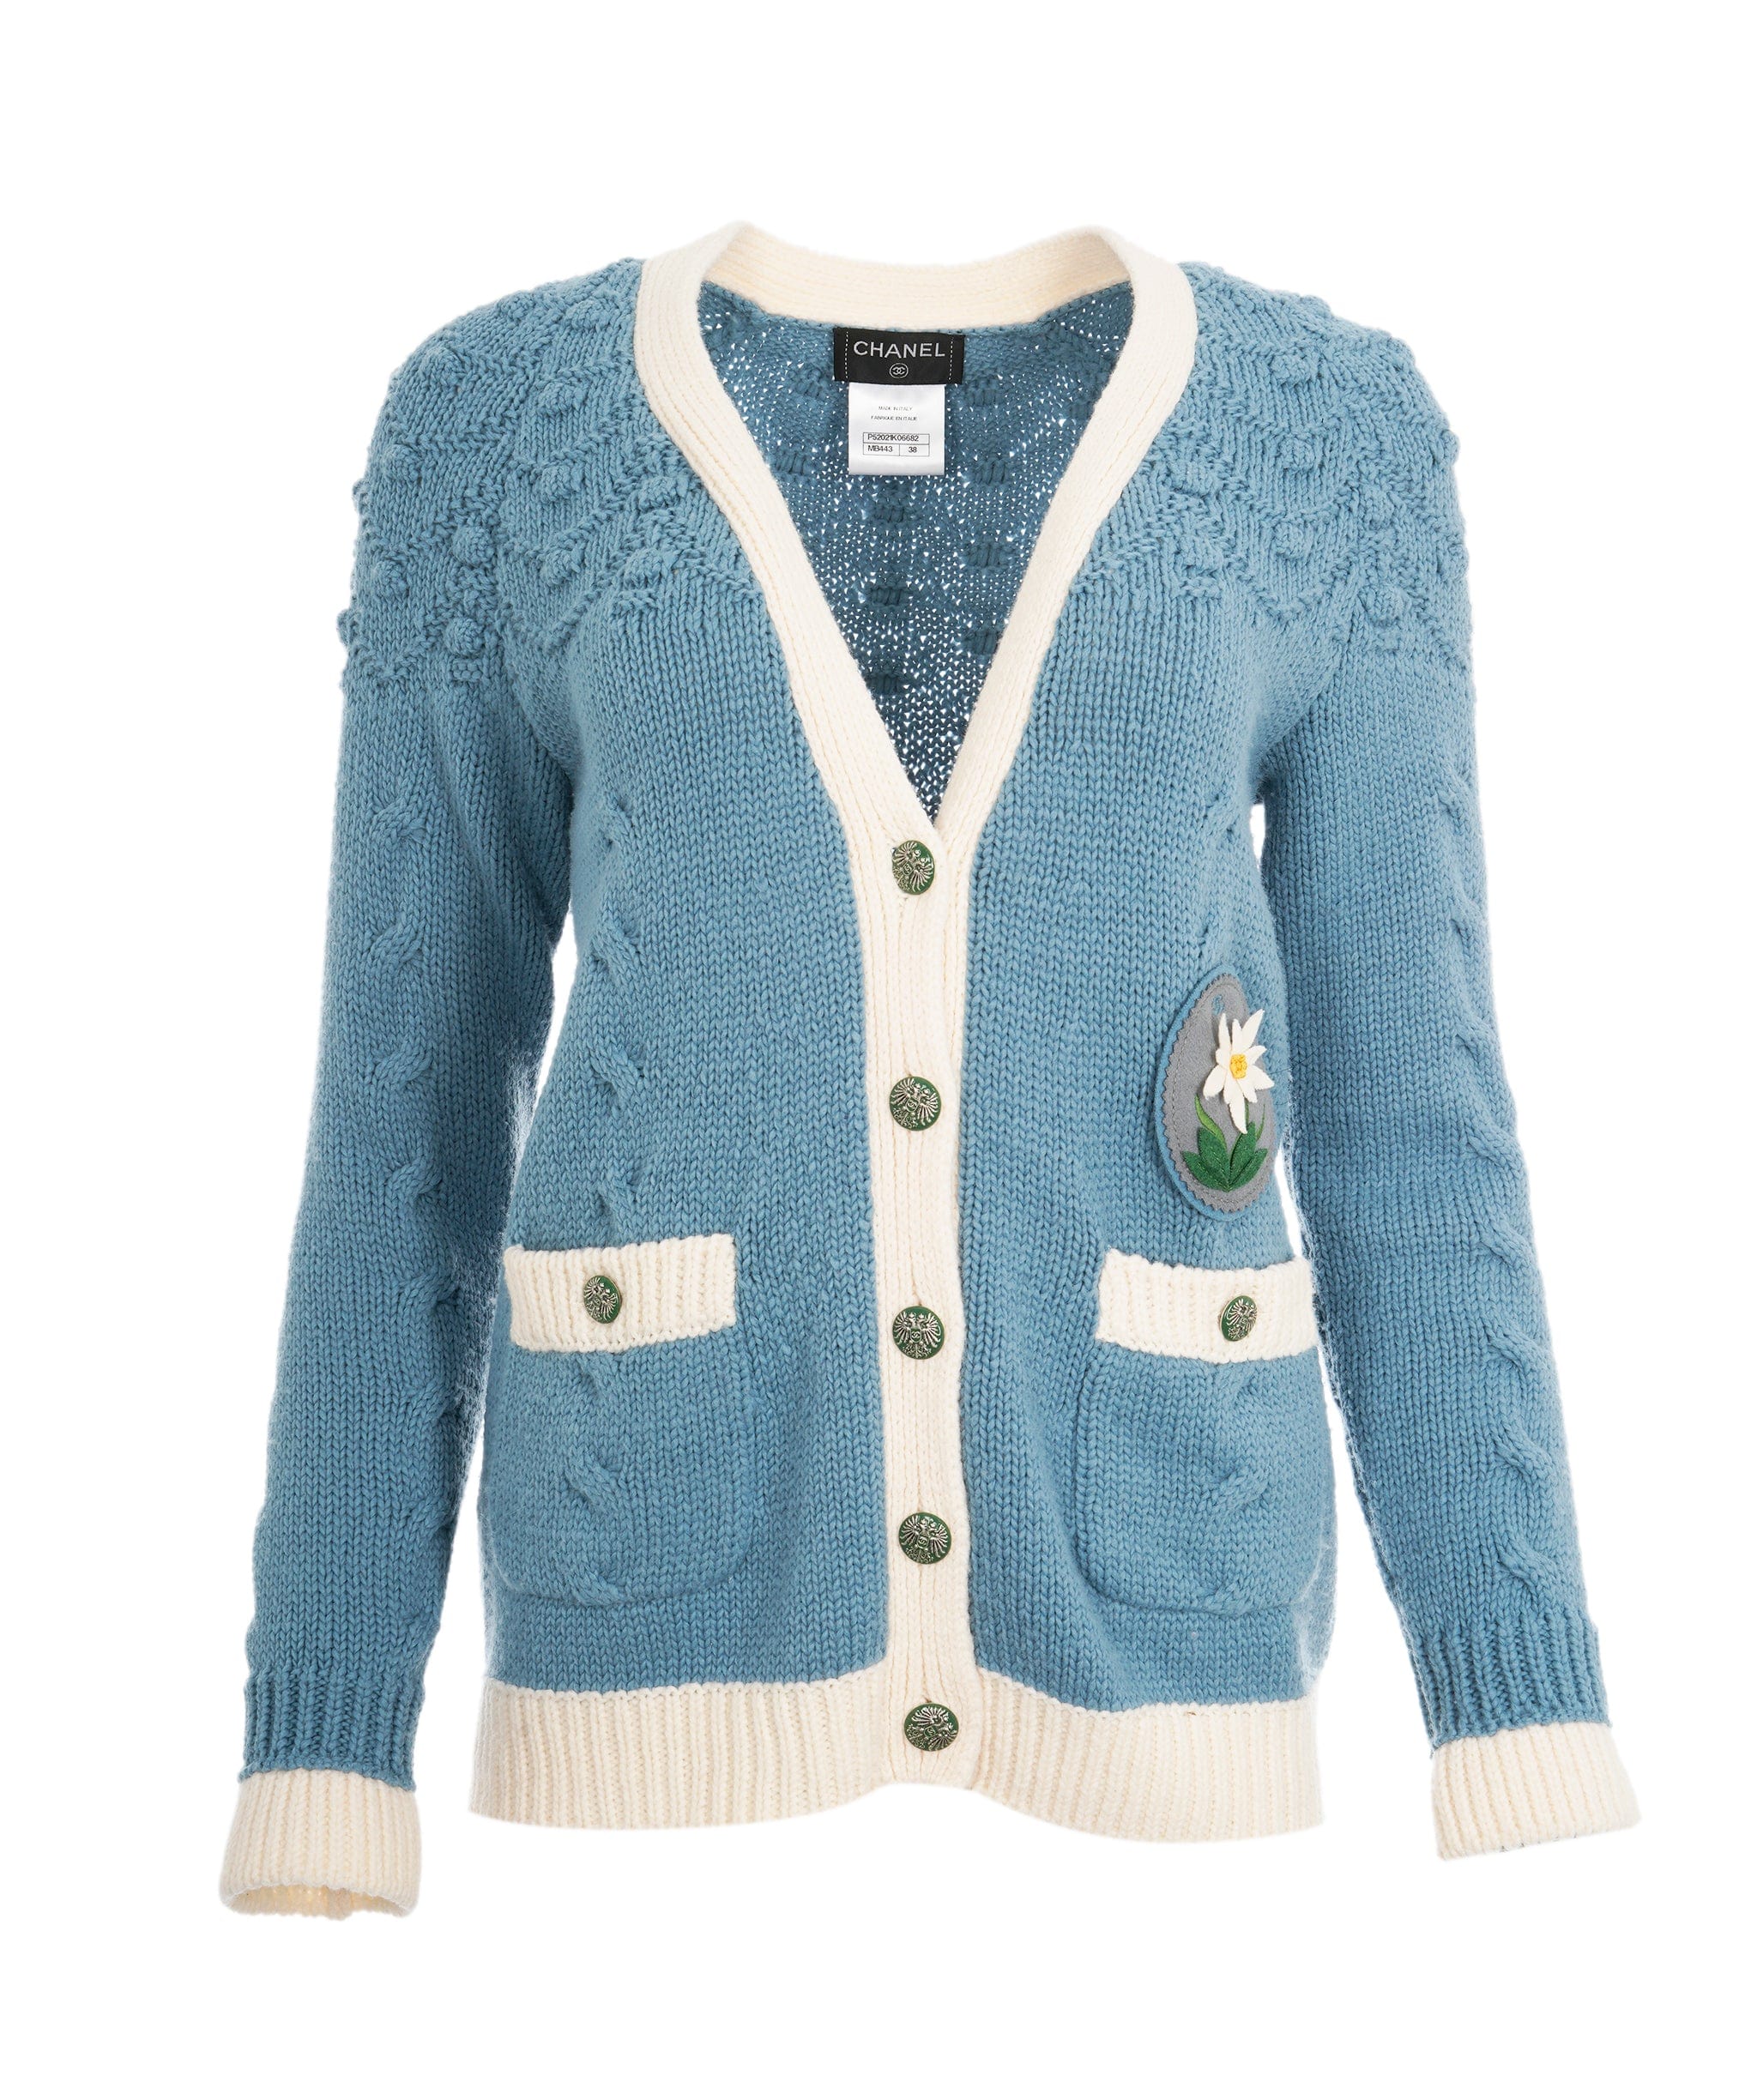 Chanel Chanel Blue Cardigan with Floral Patch UKL1395